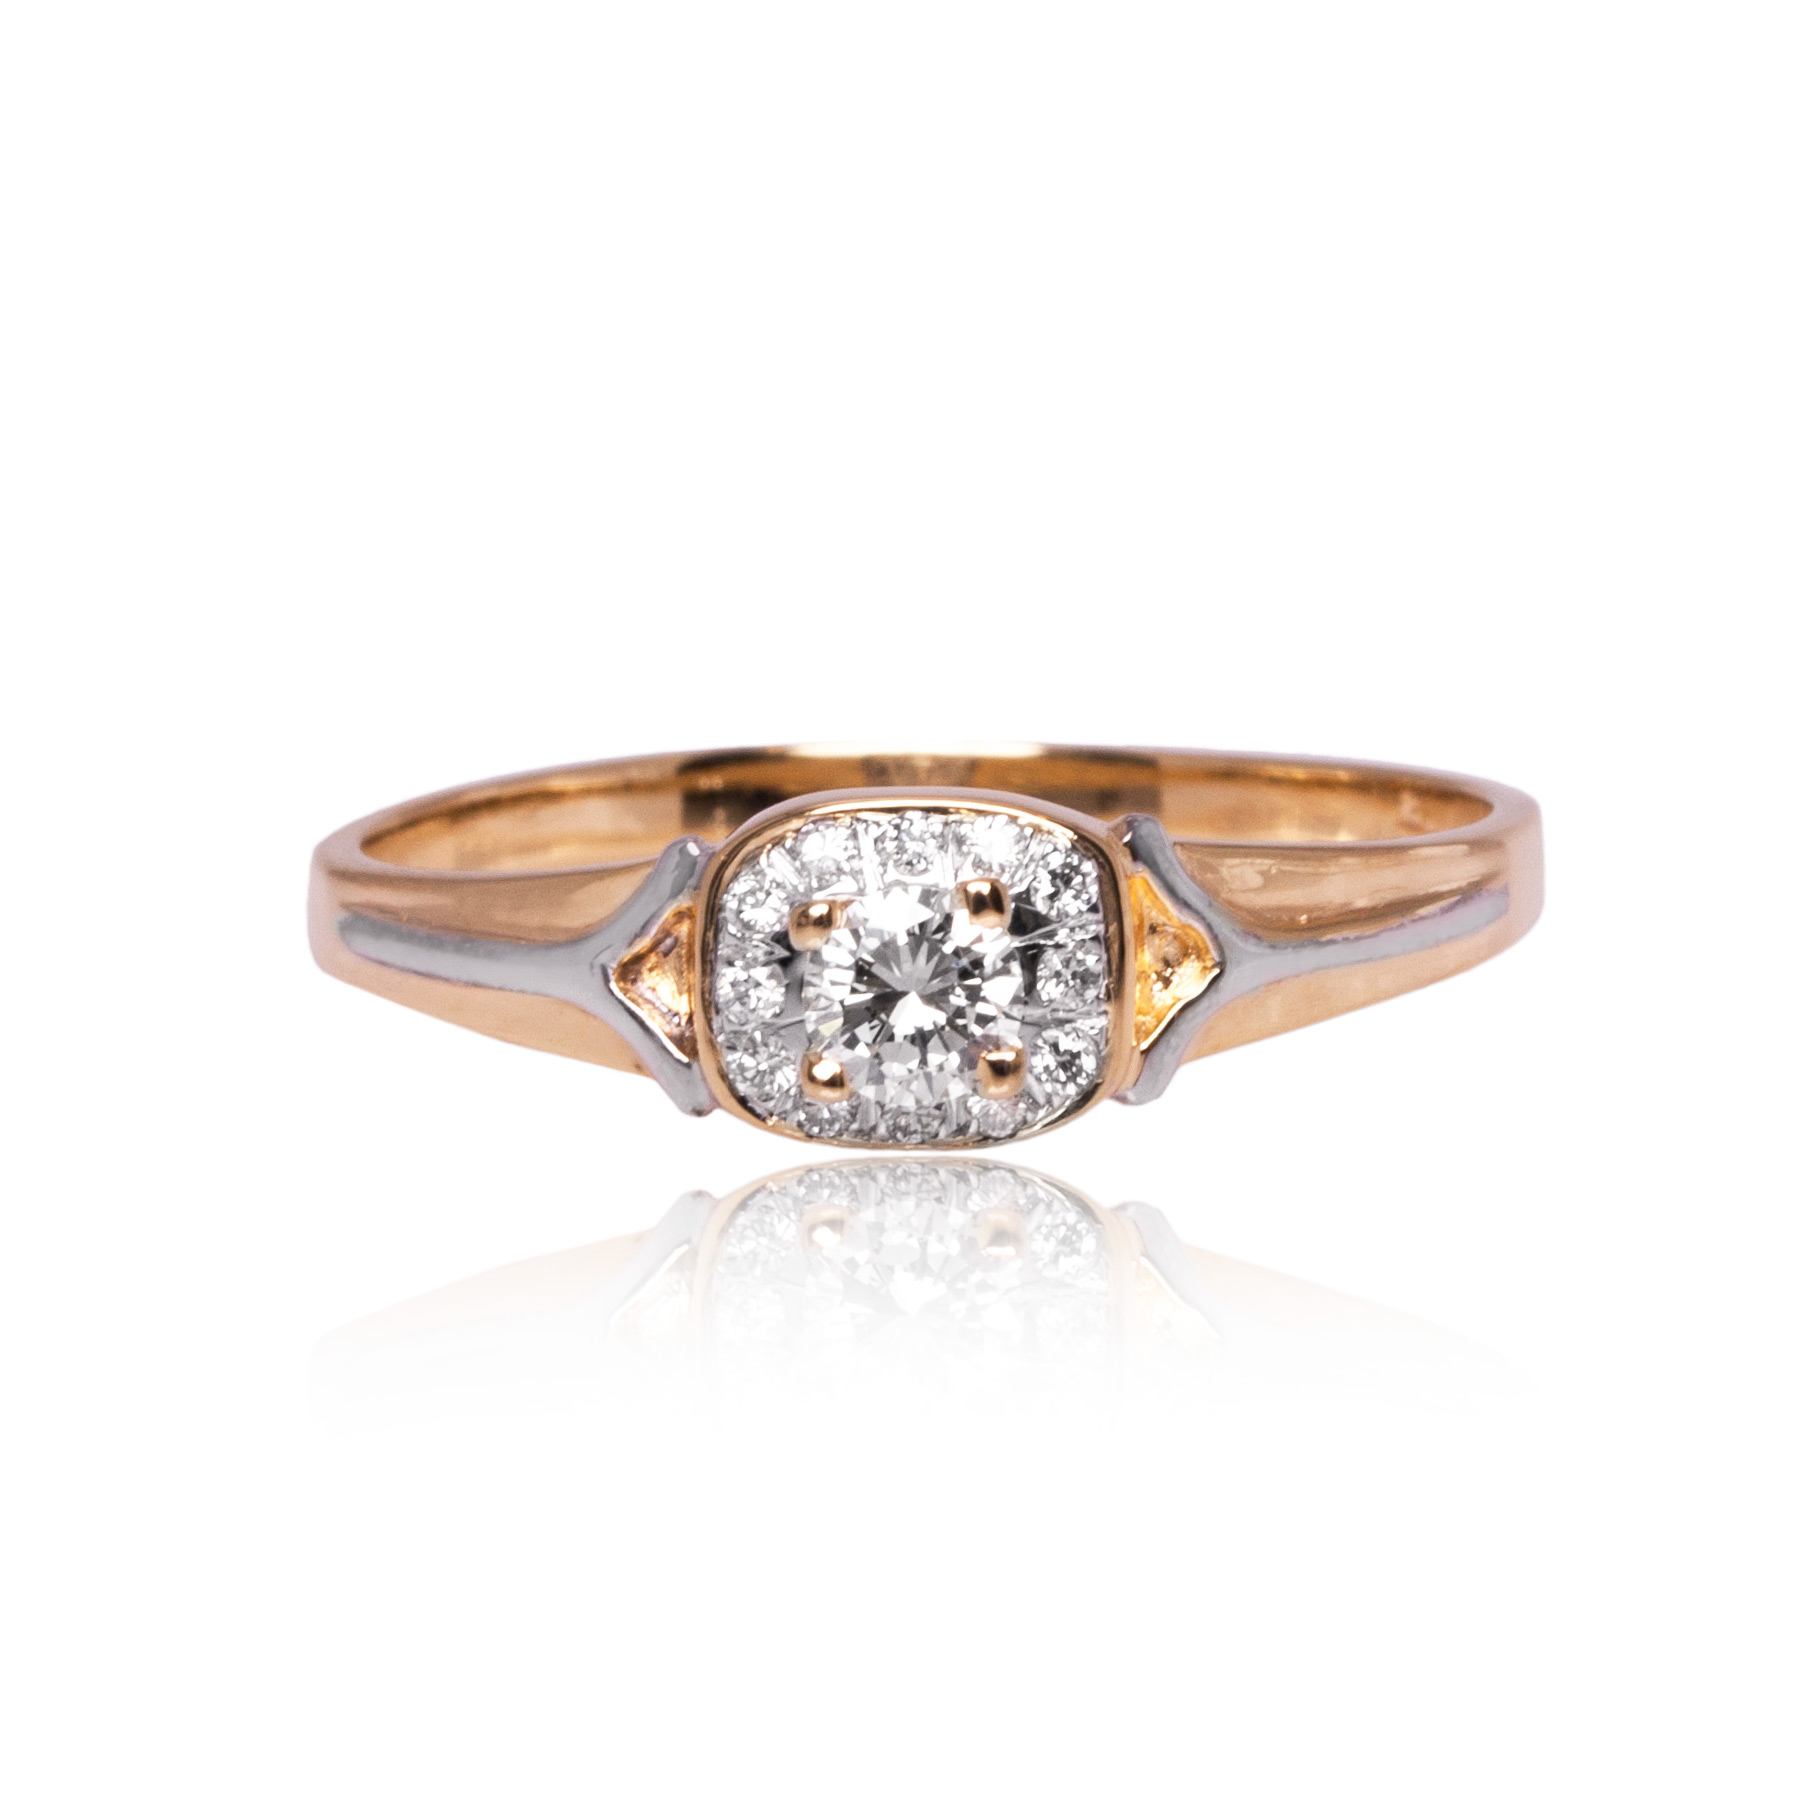 183-continental-jewels-manufacturers-ring-cjr000183-18k-yellow-gold-vvs1-diamonds-customised-ring.jpg